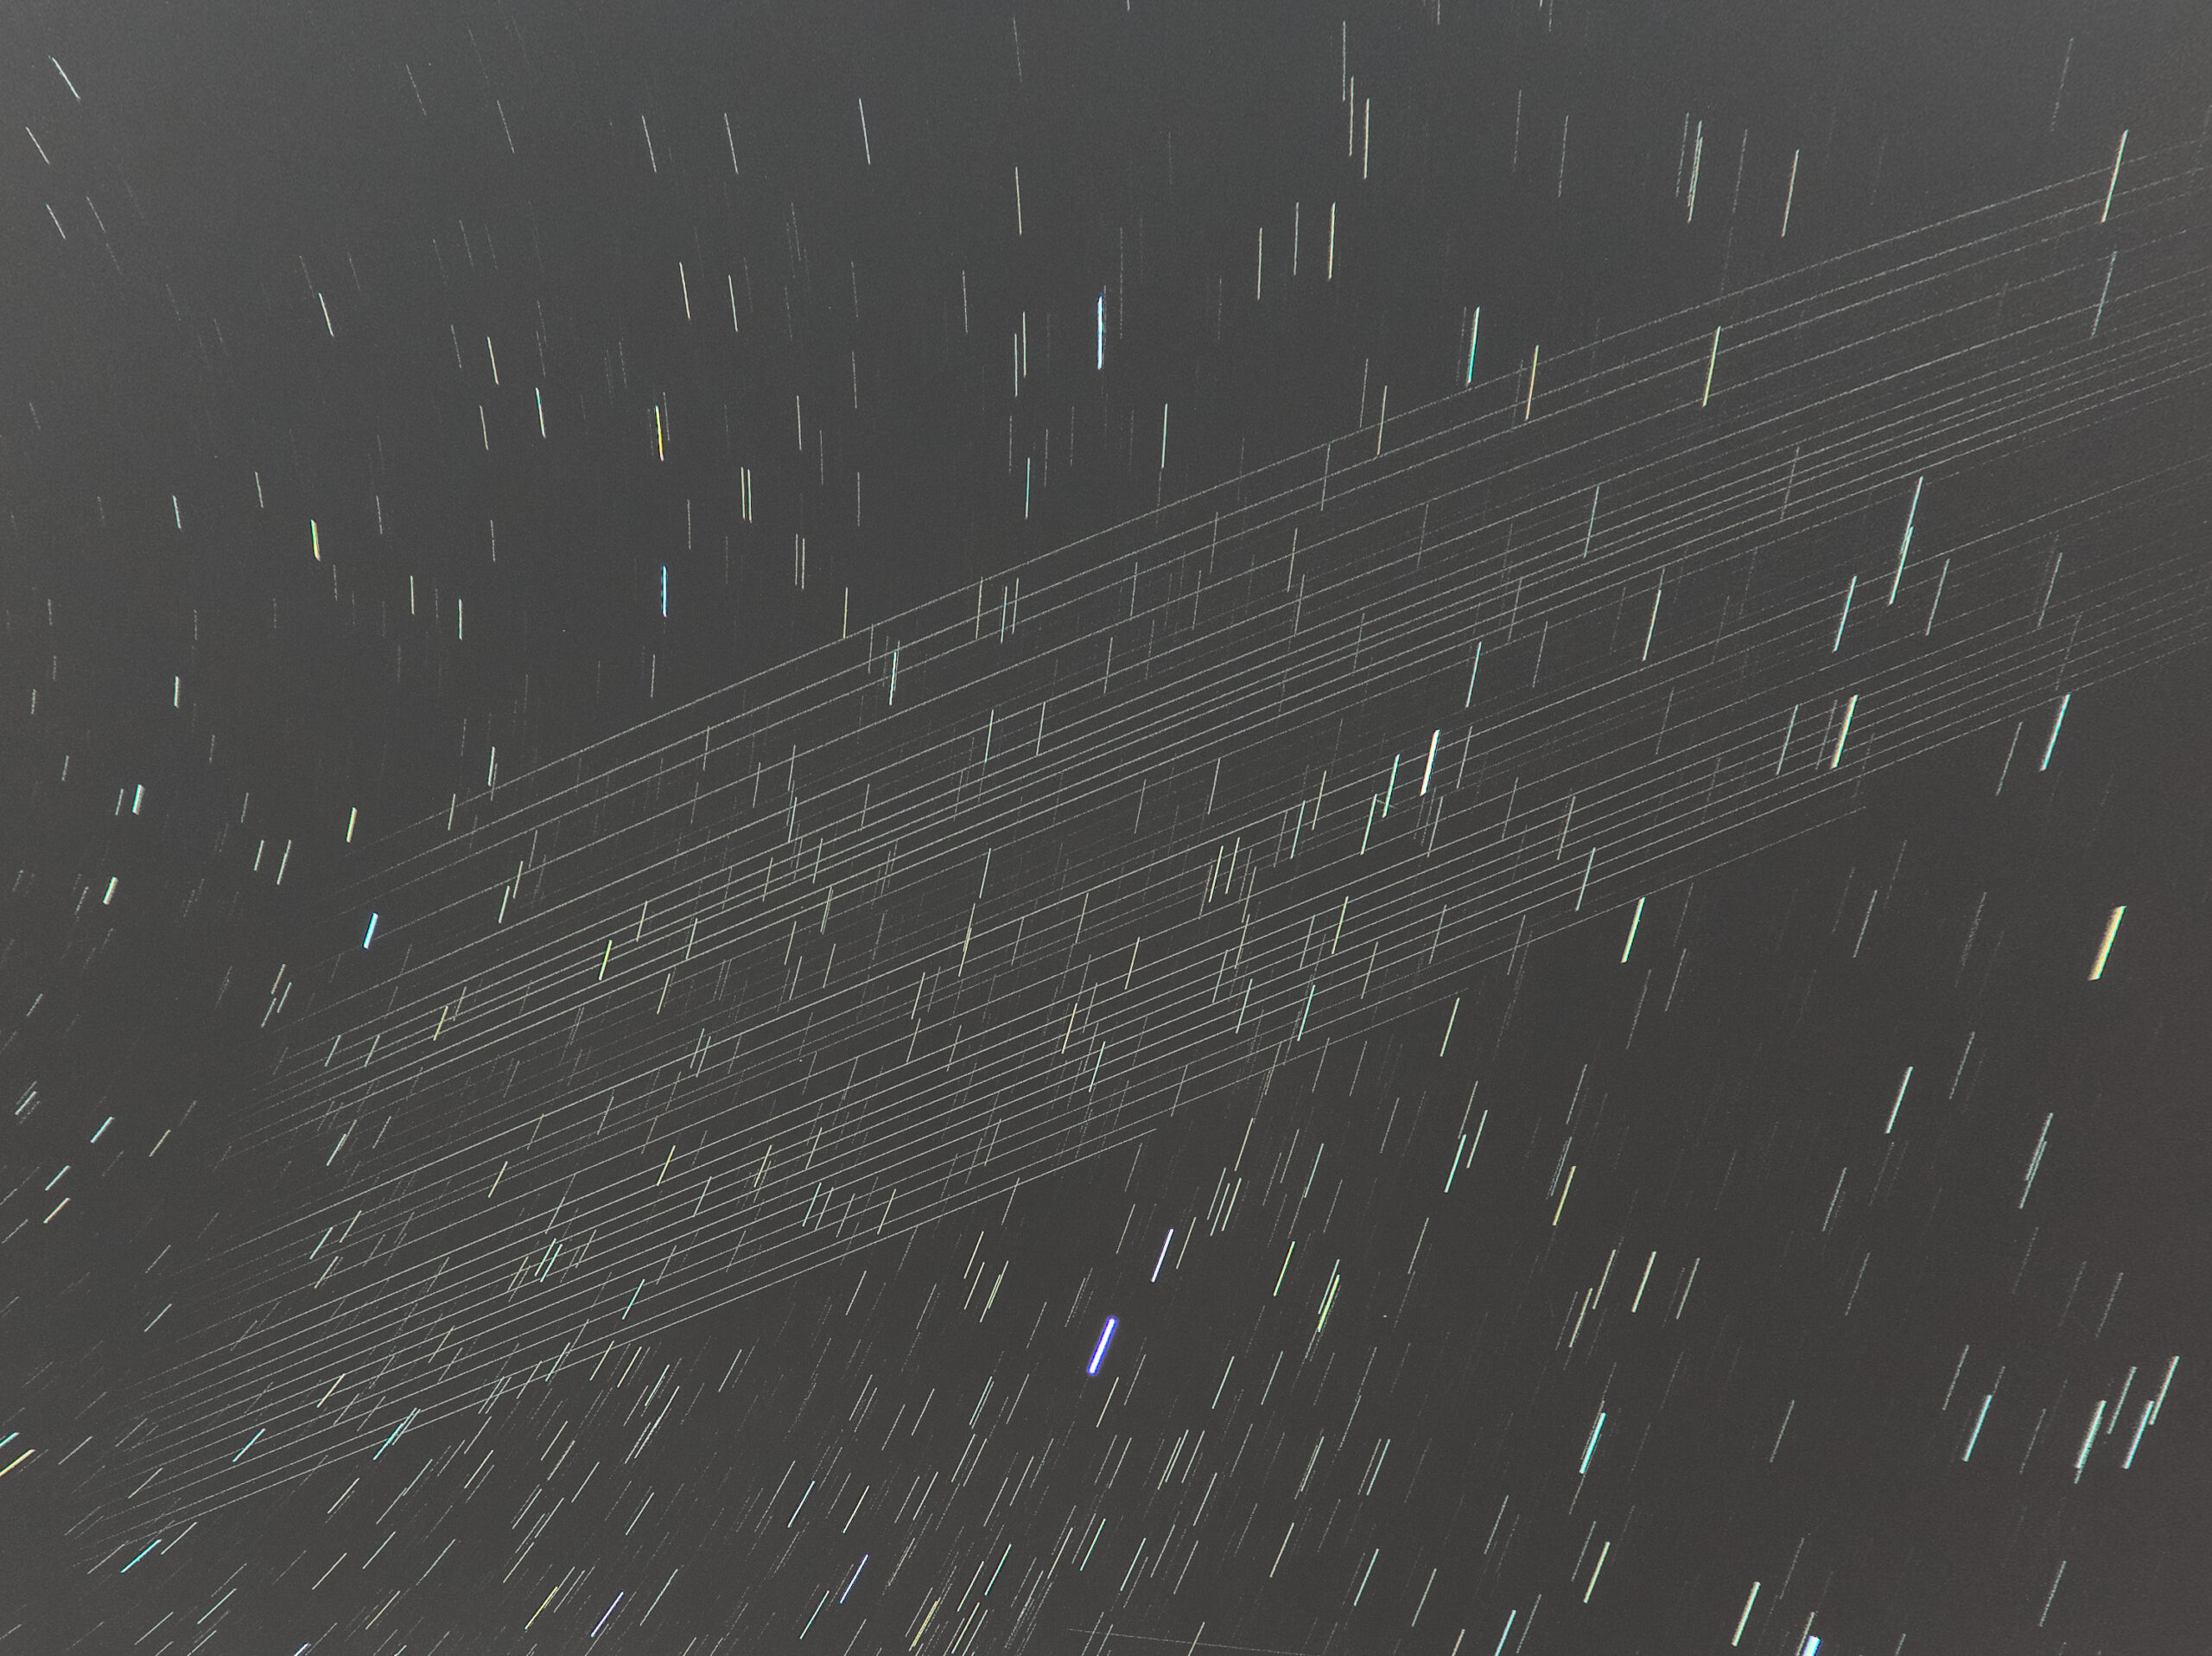 Starkink satellites trails on the night sky as seen from Cordoba, Argentina on Mat 6th, 2020.